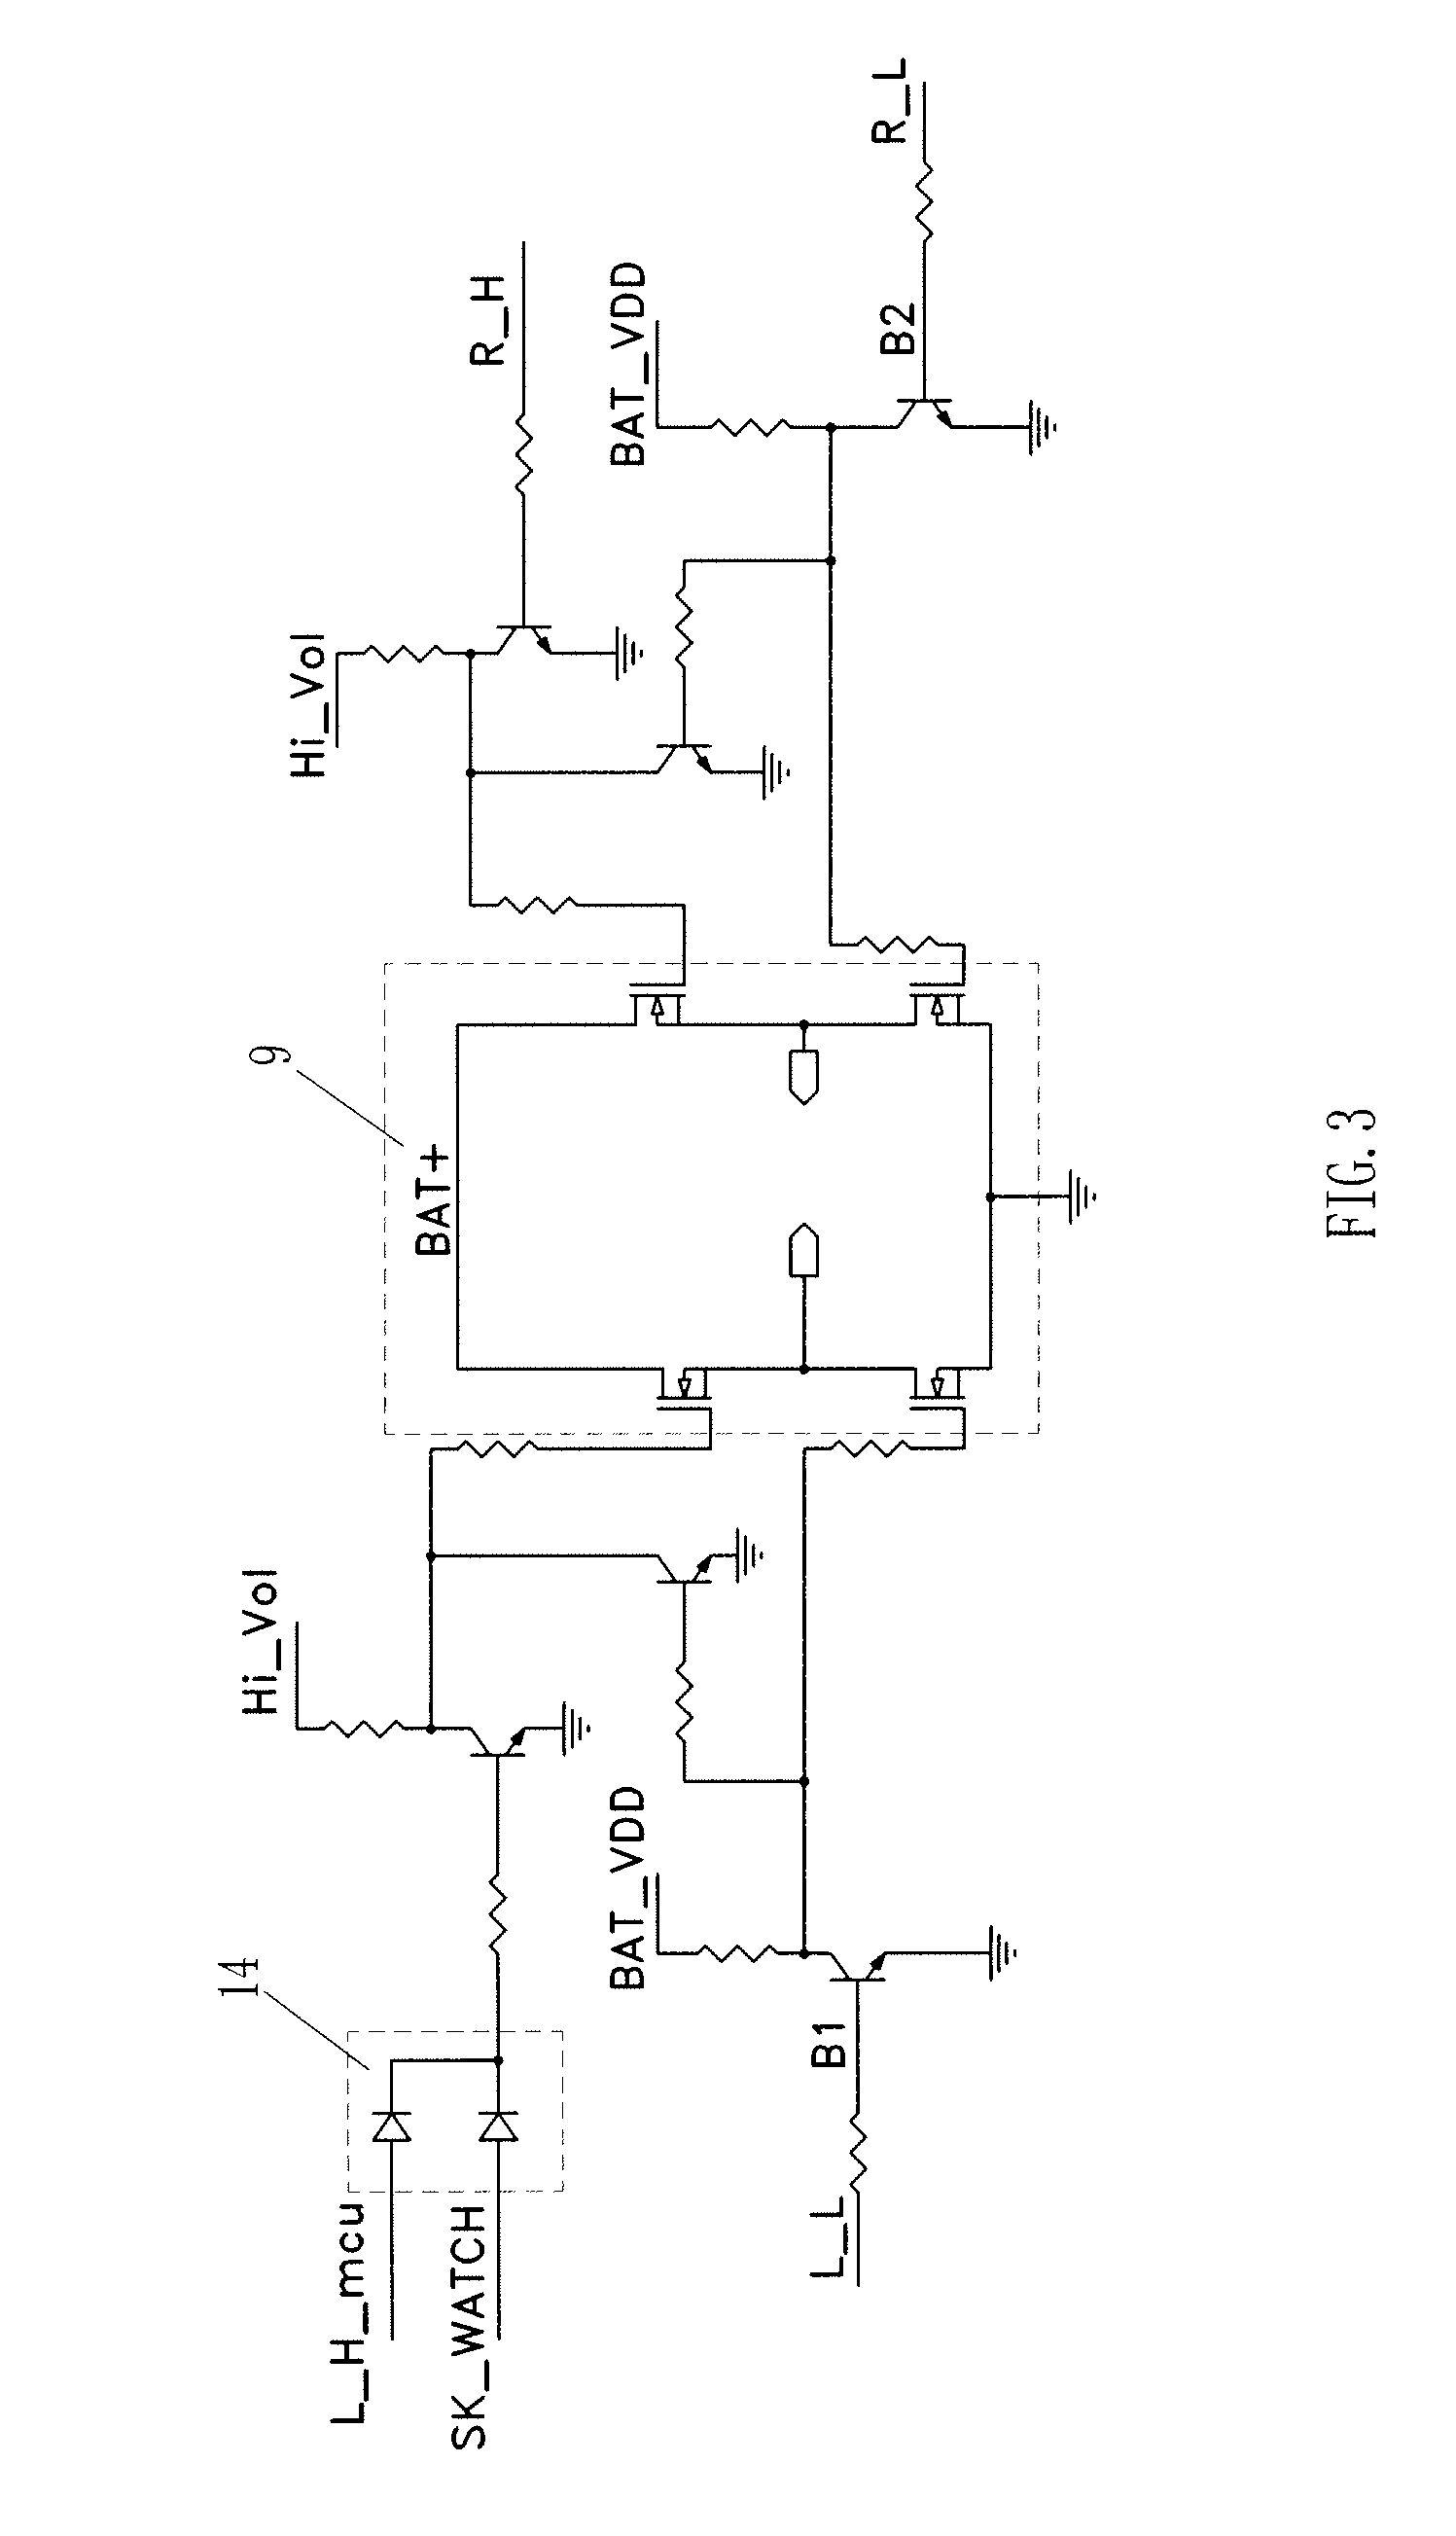 Control method for motor-driven shears